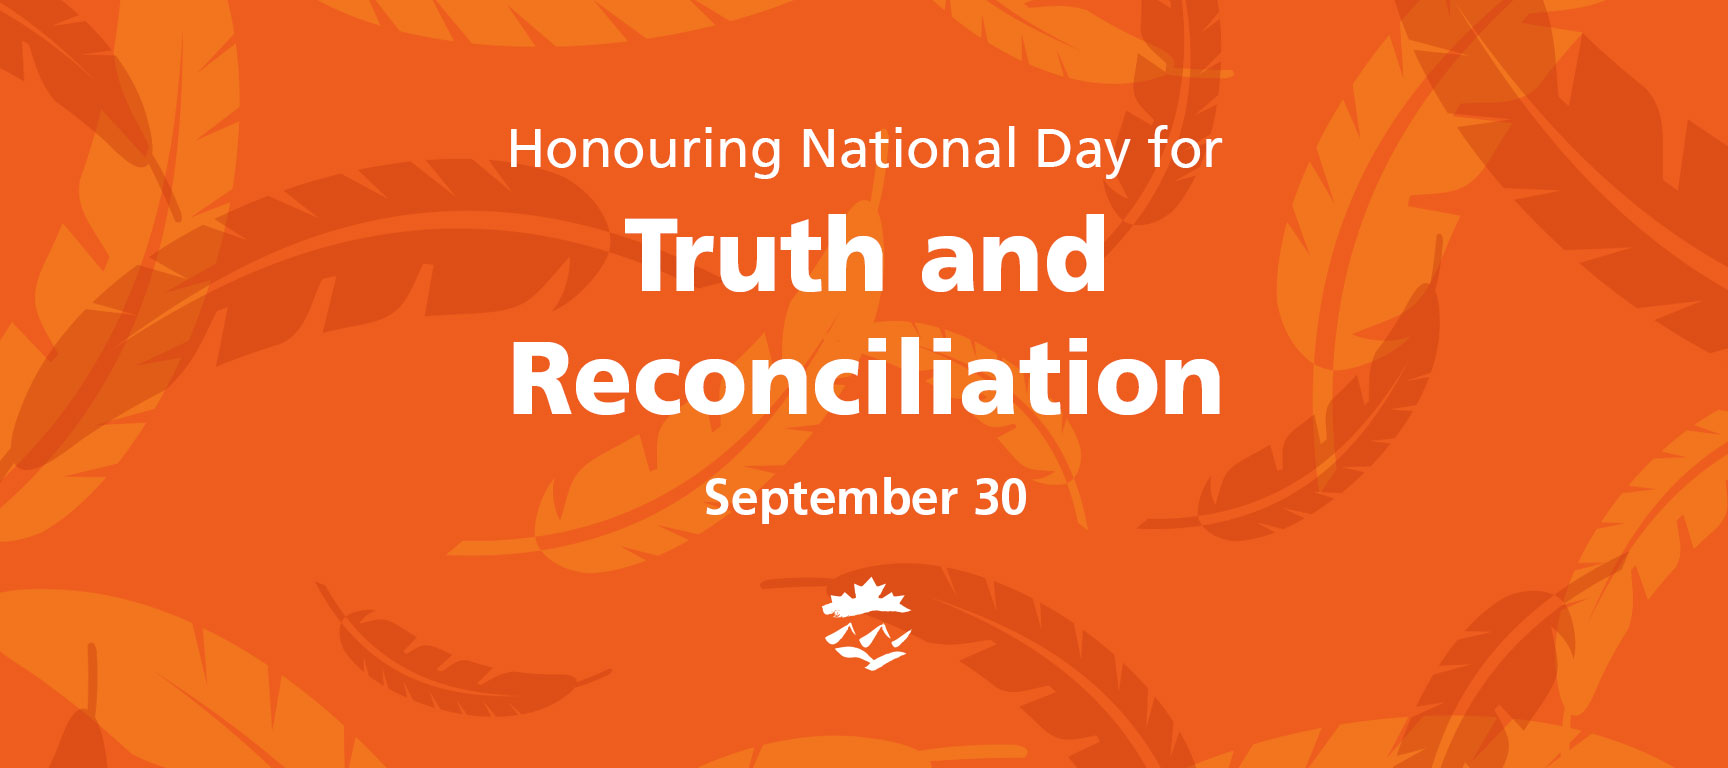 Truth and Reconciliation Day